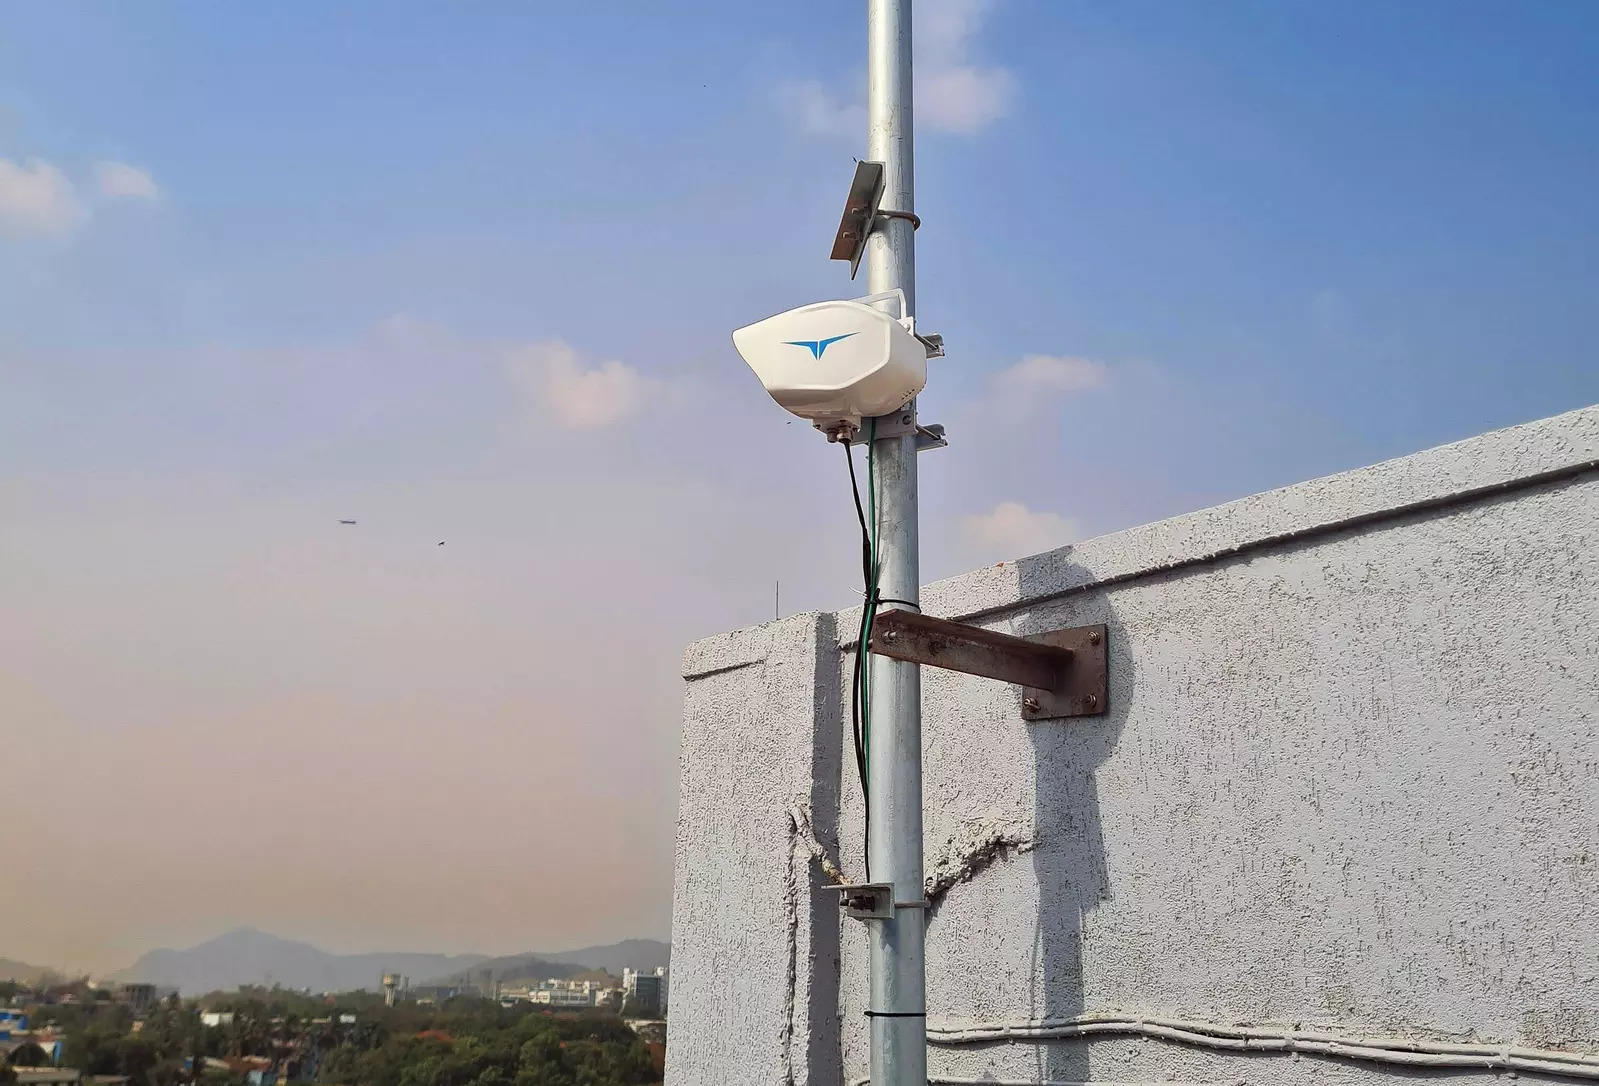  FILE PHOTO-Transcelestial's CENTAURI device, which connects to another CENTAURI via a wireless and invisible laser beam to deliver high-speed Internet connectivity for a leading enterprise Internet Service Provider in Asia, is seen at an unspecified location in South Asia, in this February 14, 2023 handout image obtained by REUTERS.